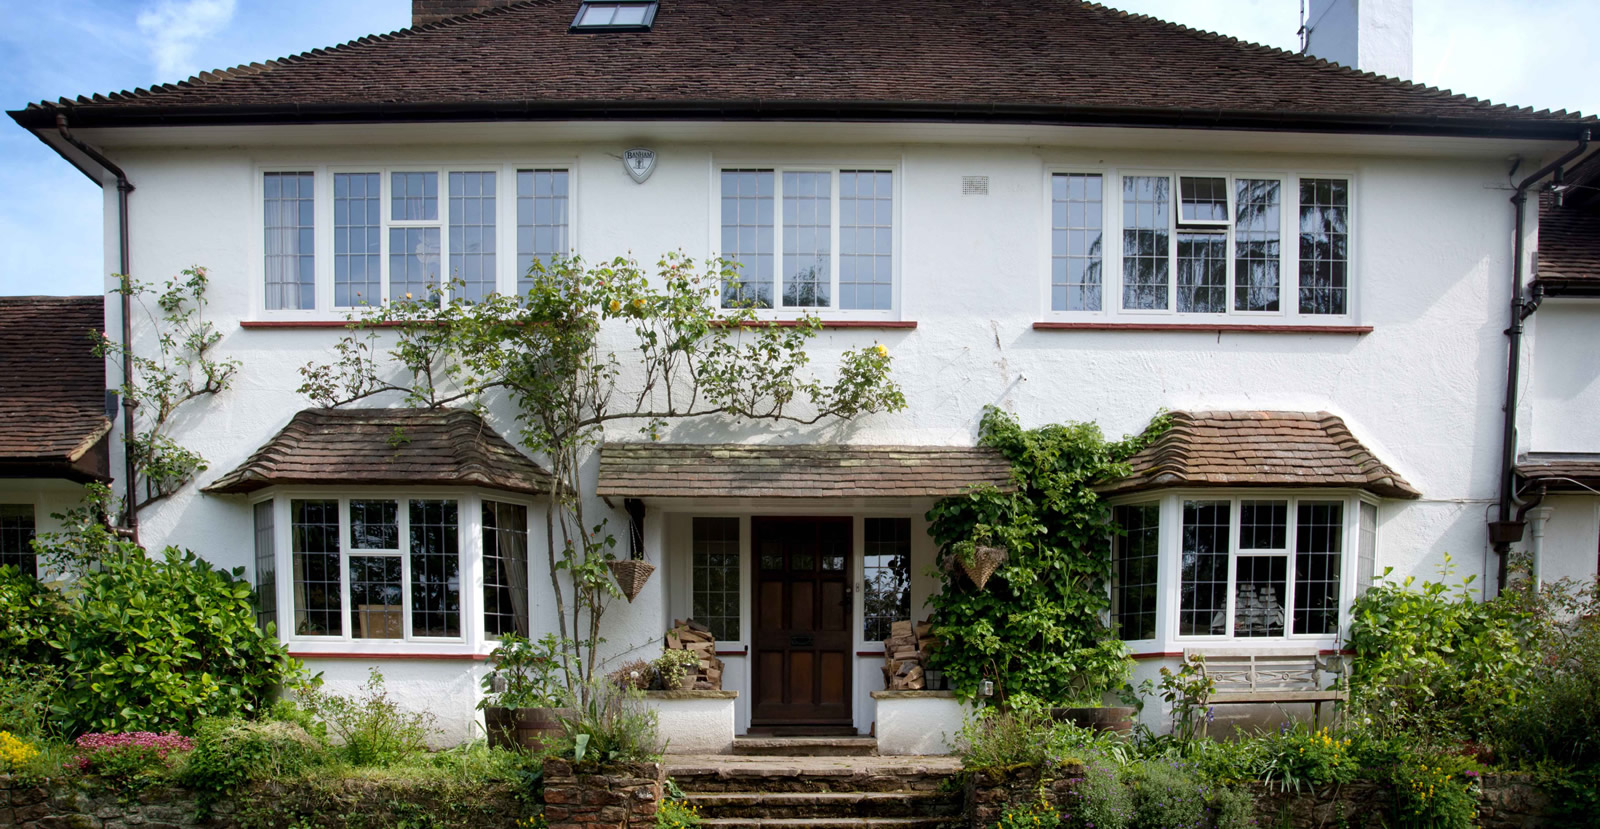 Private Residence - Guildford, Surrey